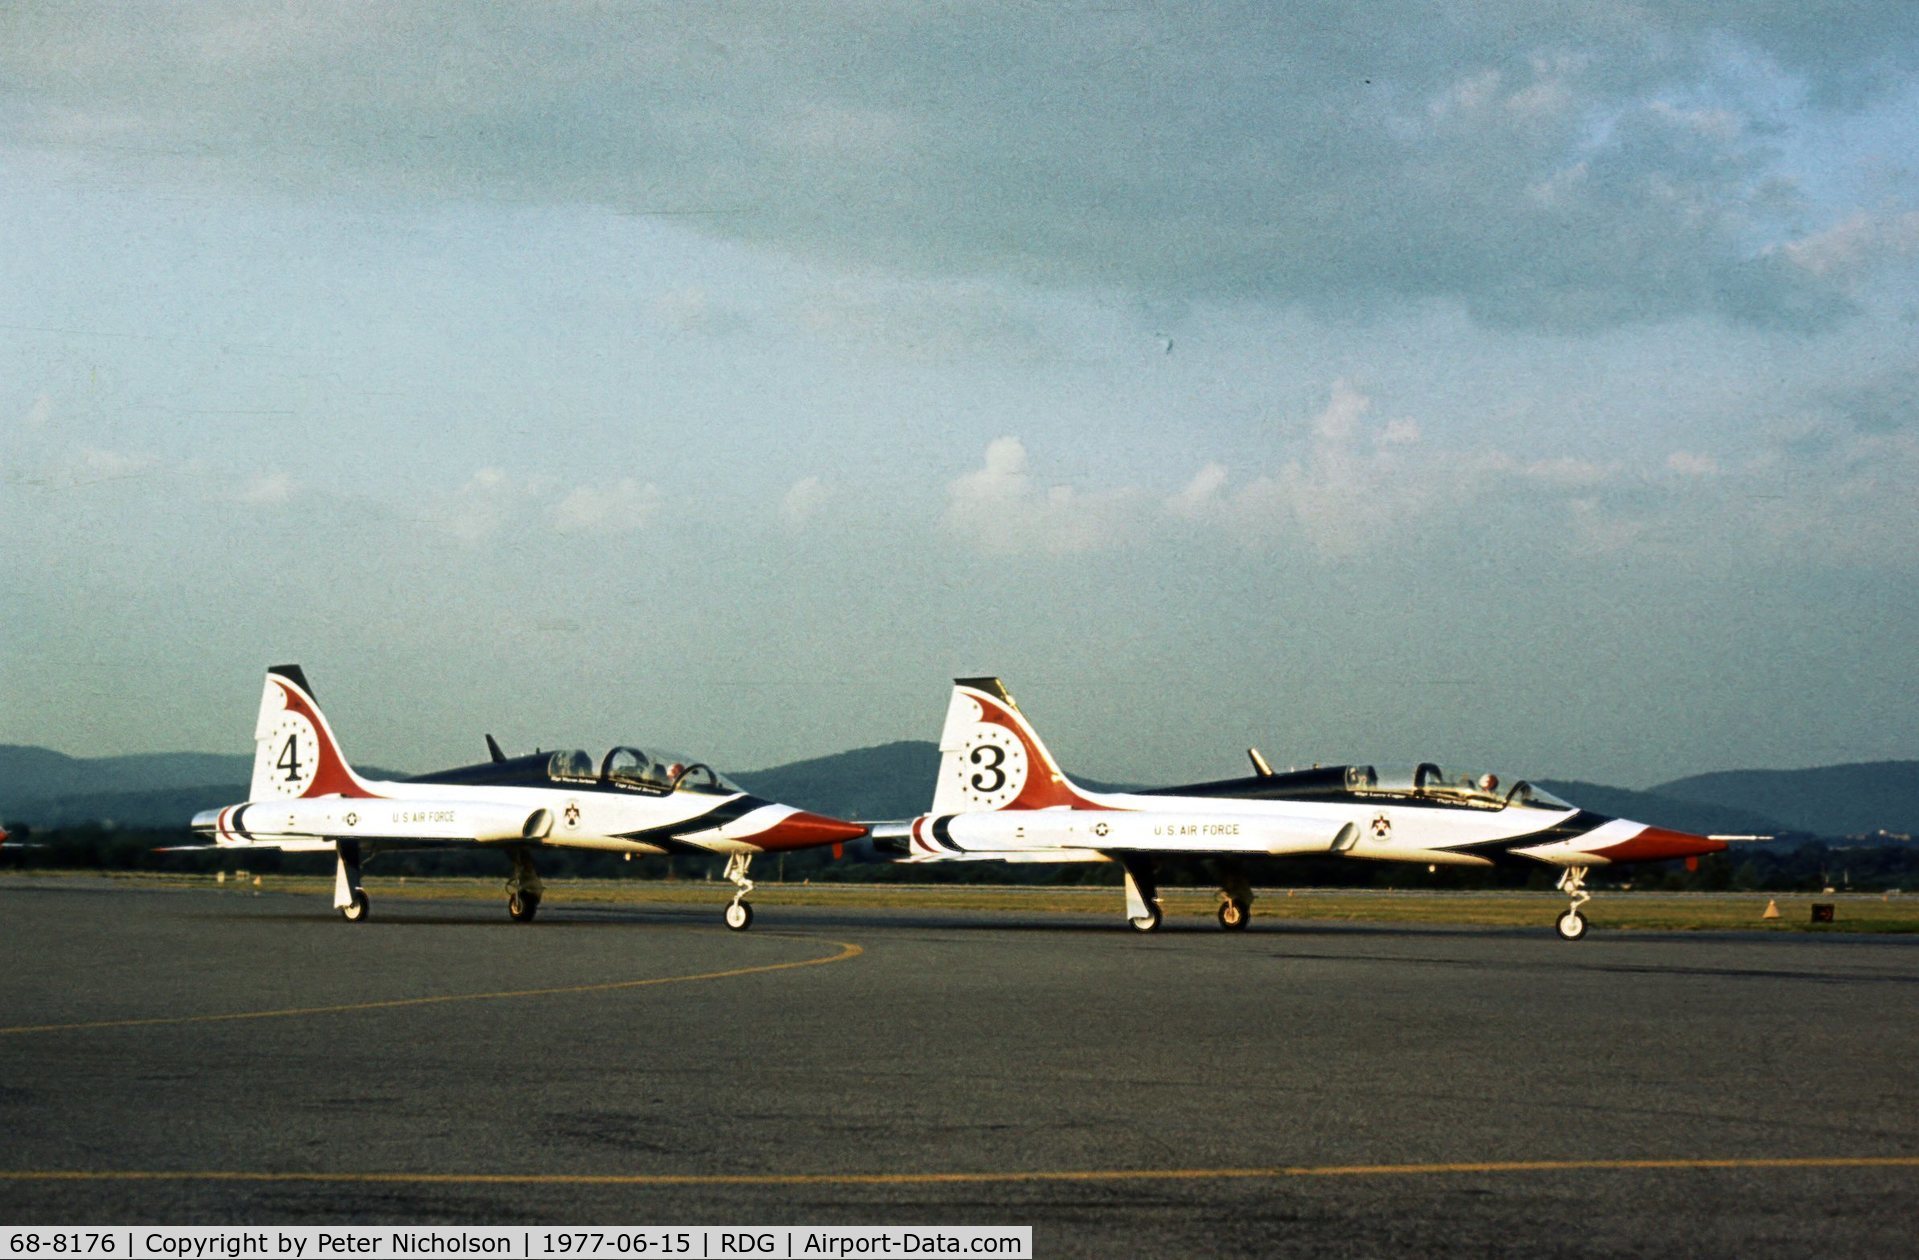 68-8176, Northrop T-38A Talon C/N T.6181, Talon number 3, together with number 4 68-8175, of the Thunderbirds Flight Demonstration Team at the 1977 Reading Airshow